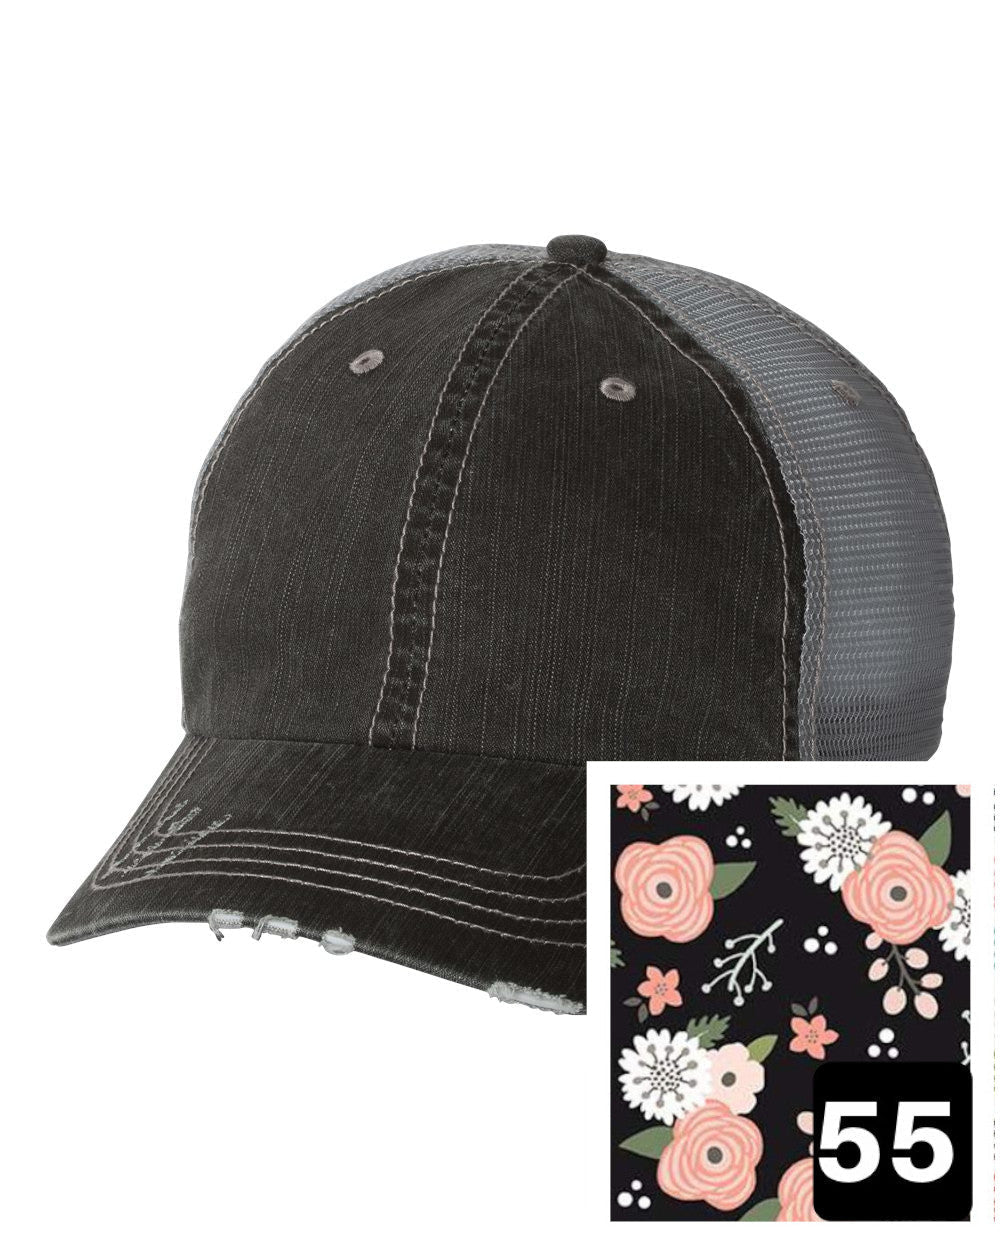 gray distressed trucker hat with petite floral on light blue fabric state of Maine